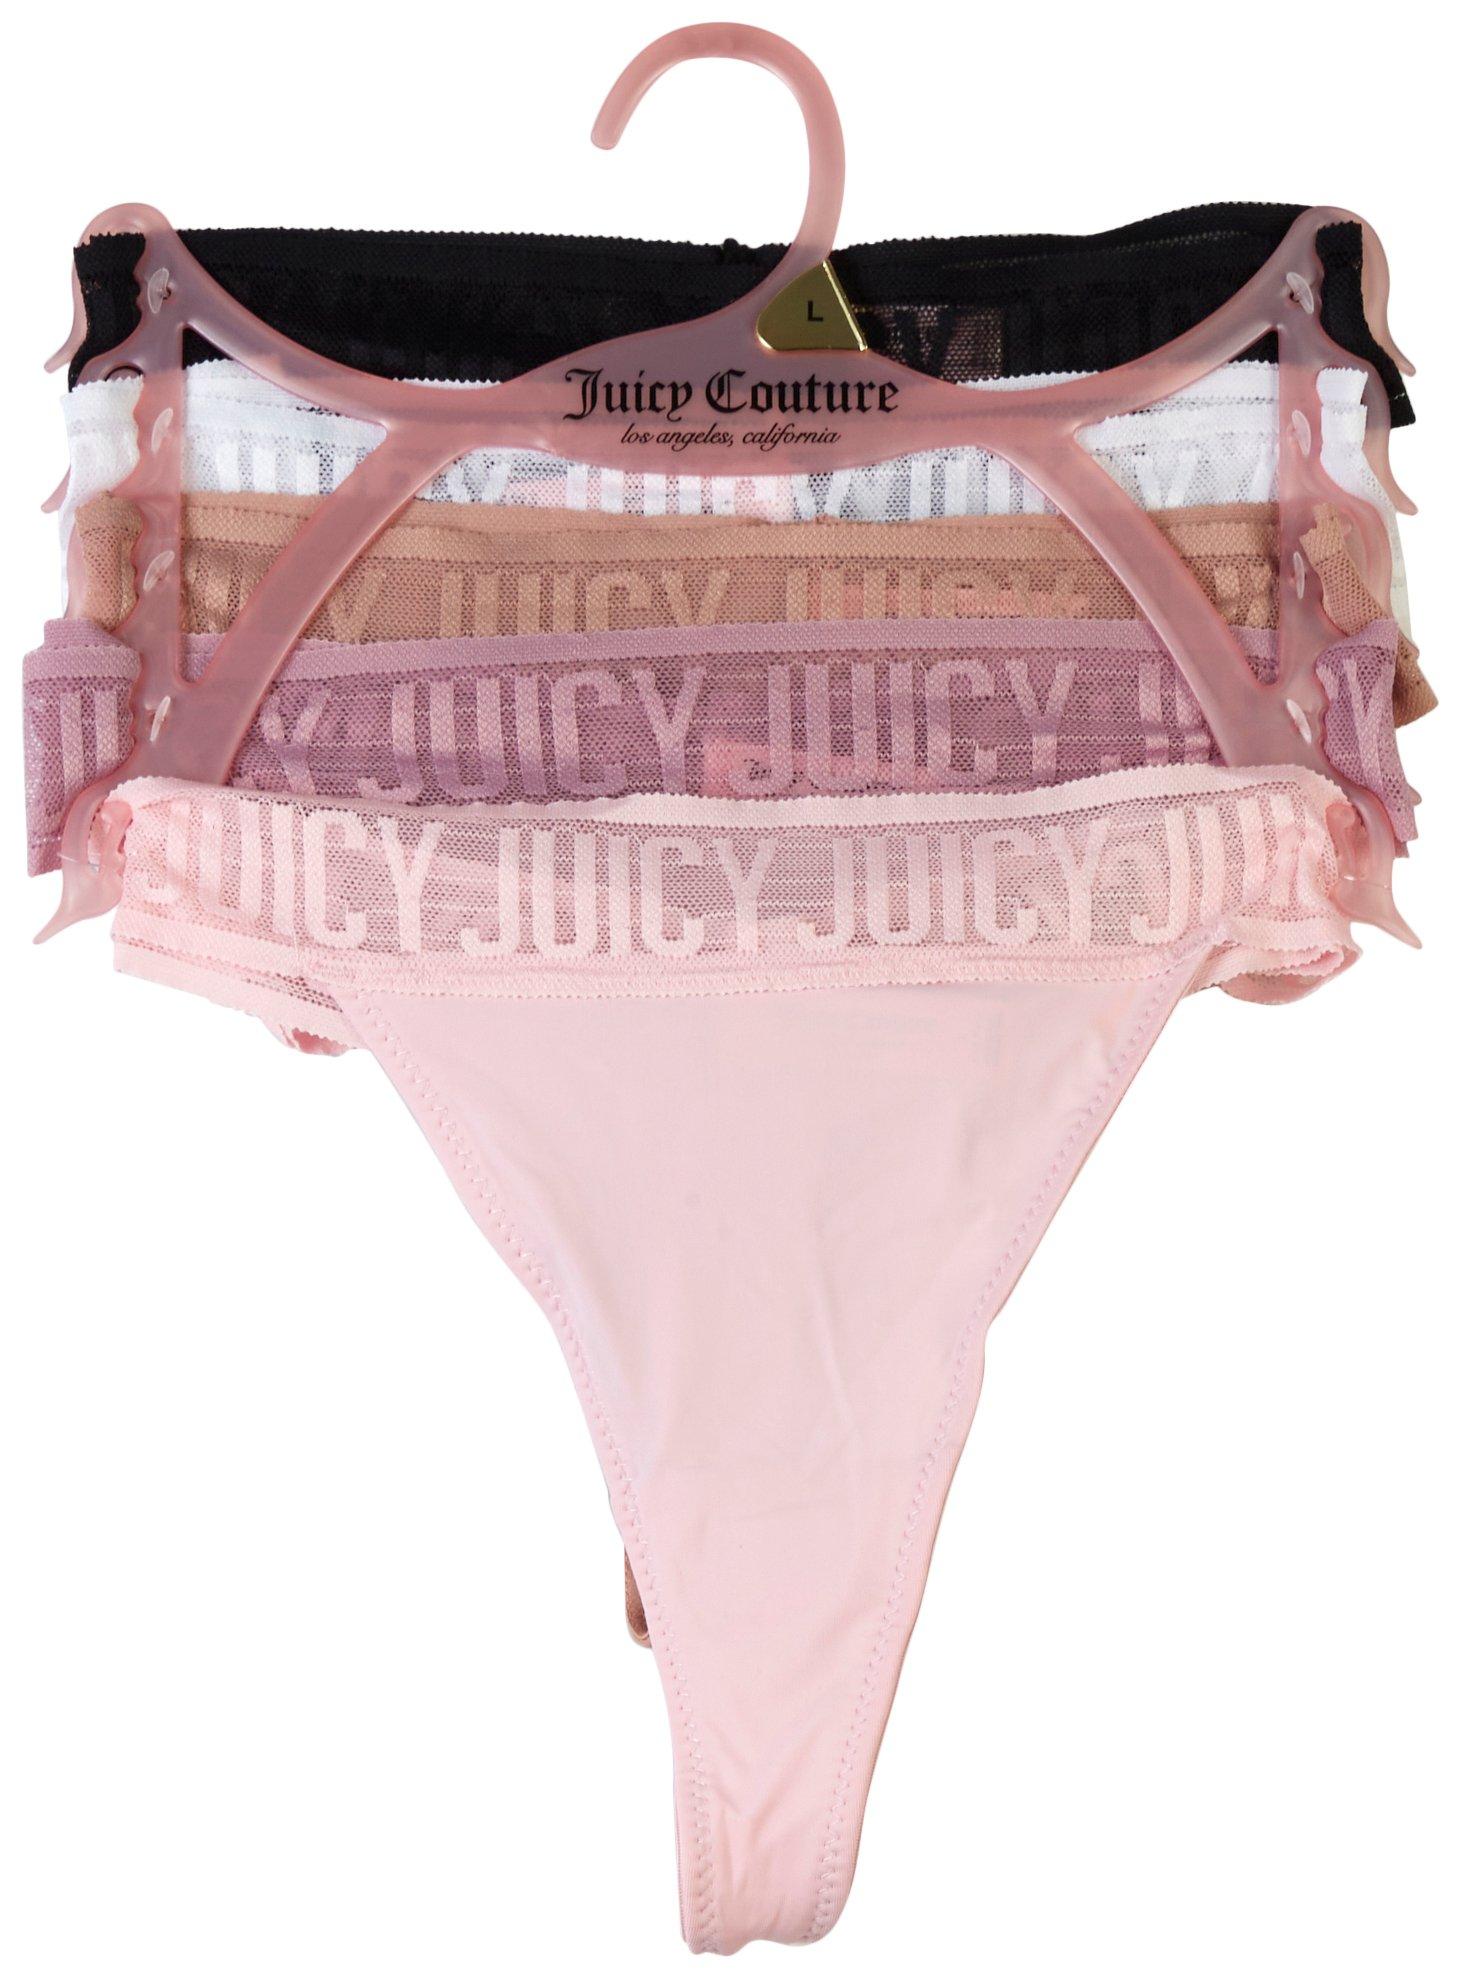 Juicy Couture mesh low rise thong in pink